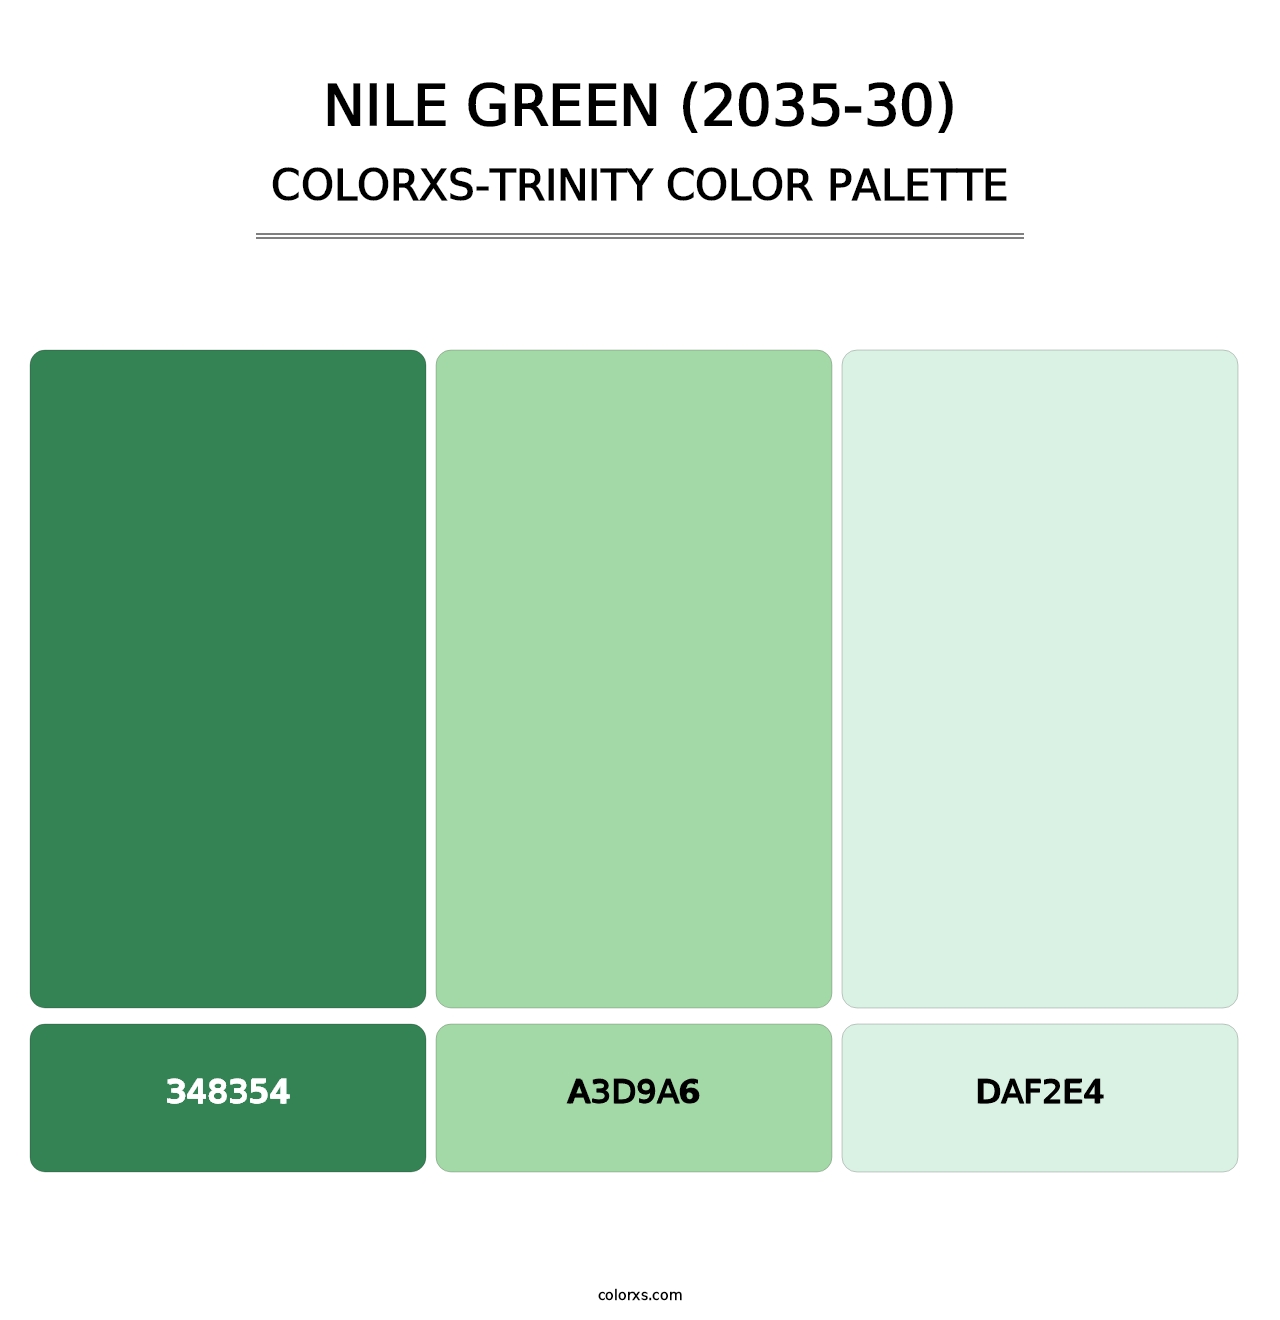 Nile Green (2035-30) - Colorxs Trinity Palette